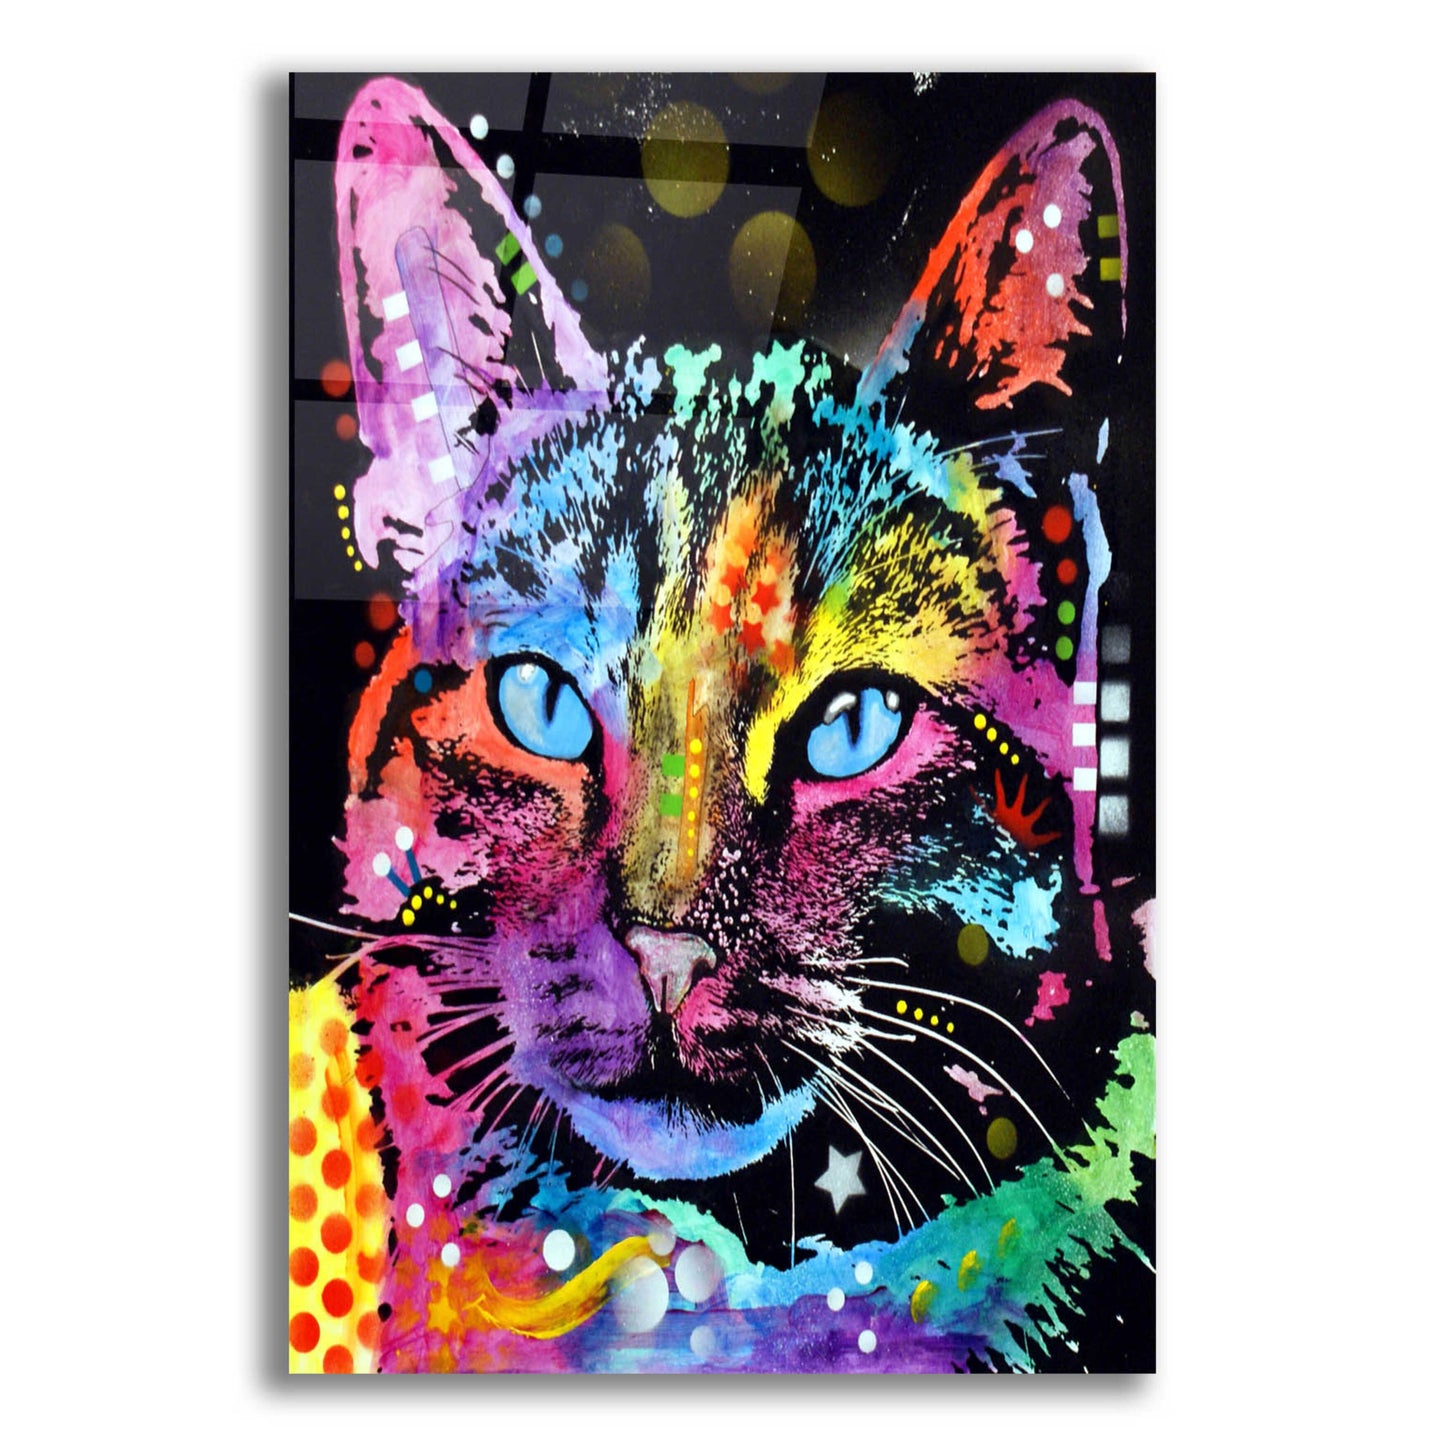 Epic Art 'Thoughtful Cat' by Dean Russo, Acrylic Glass Wall Art,12x16